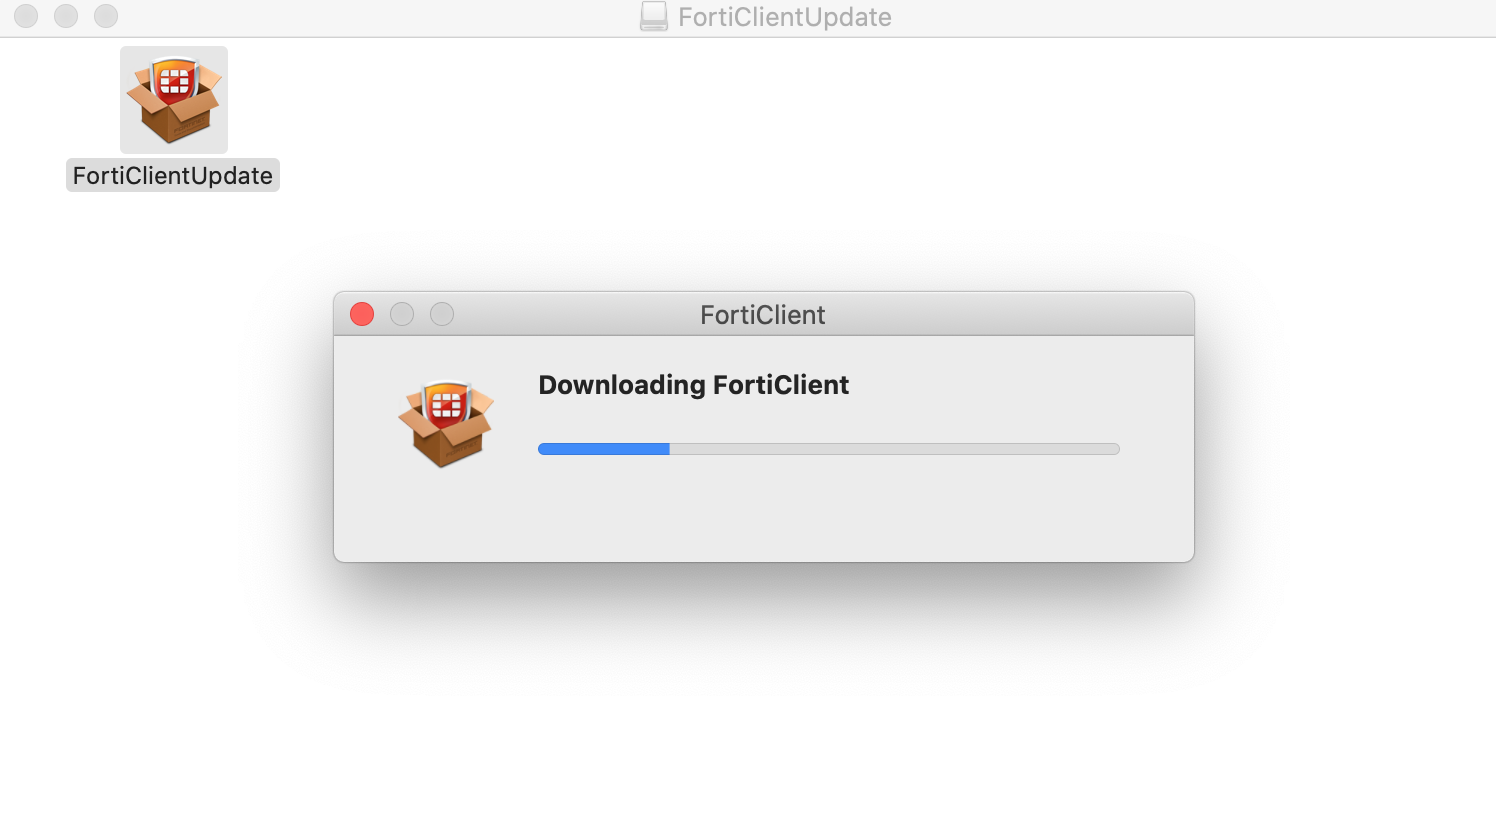 forticlient for mac os sierra